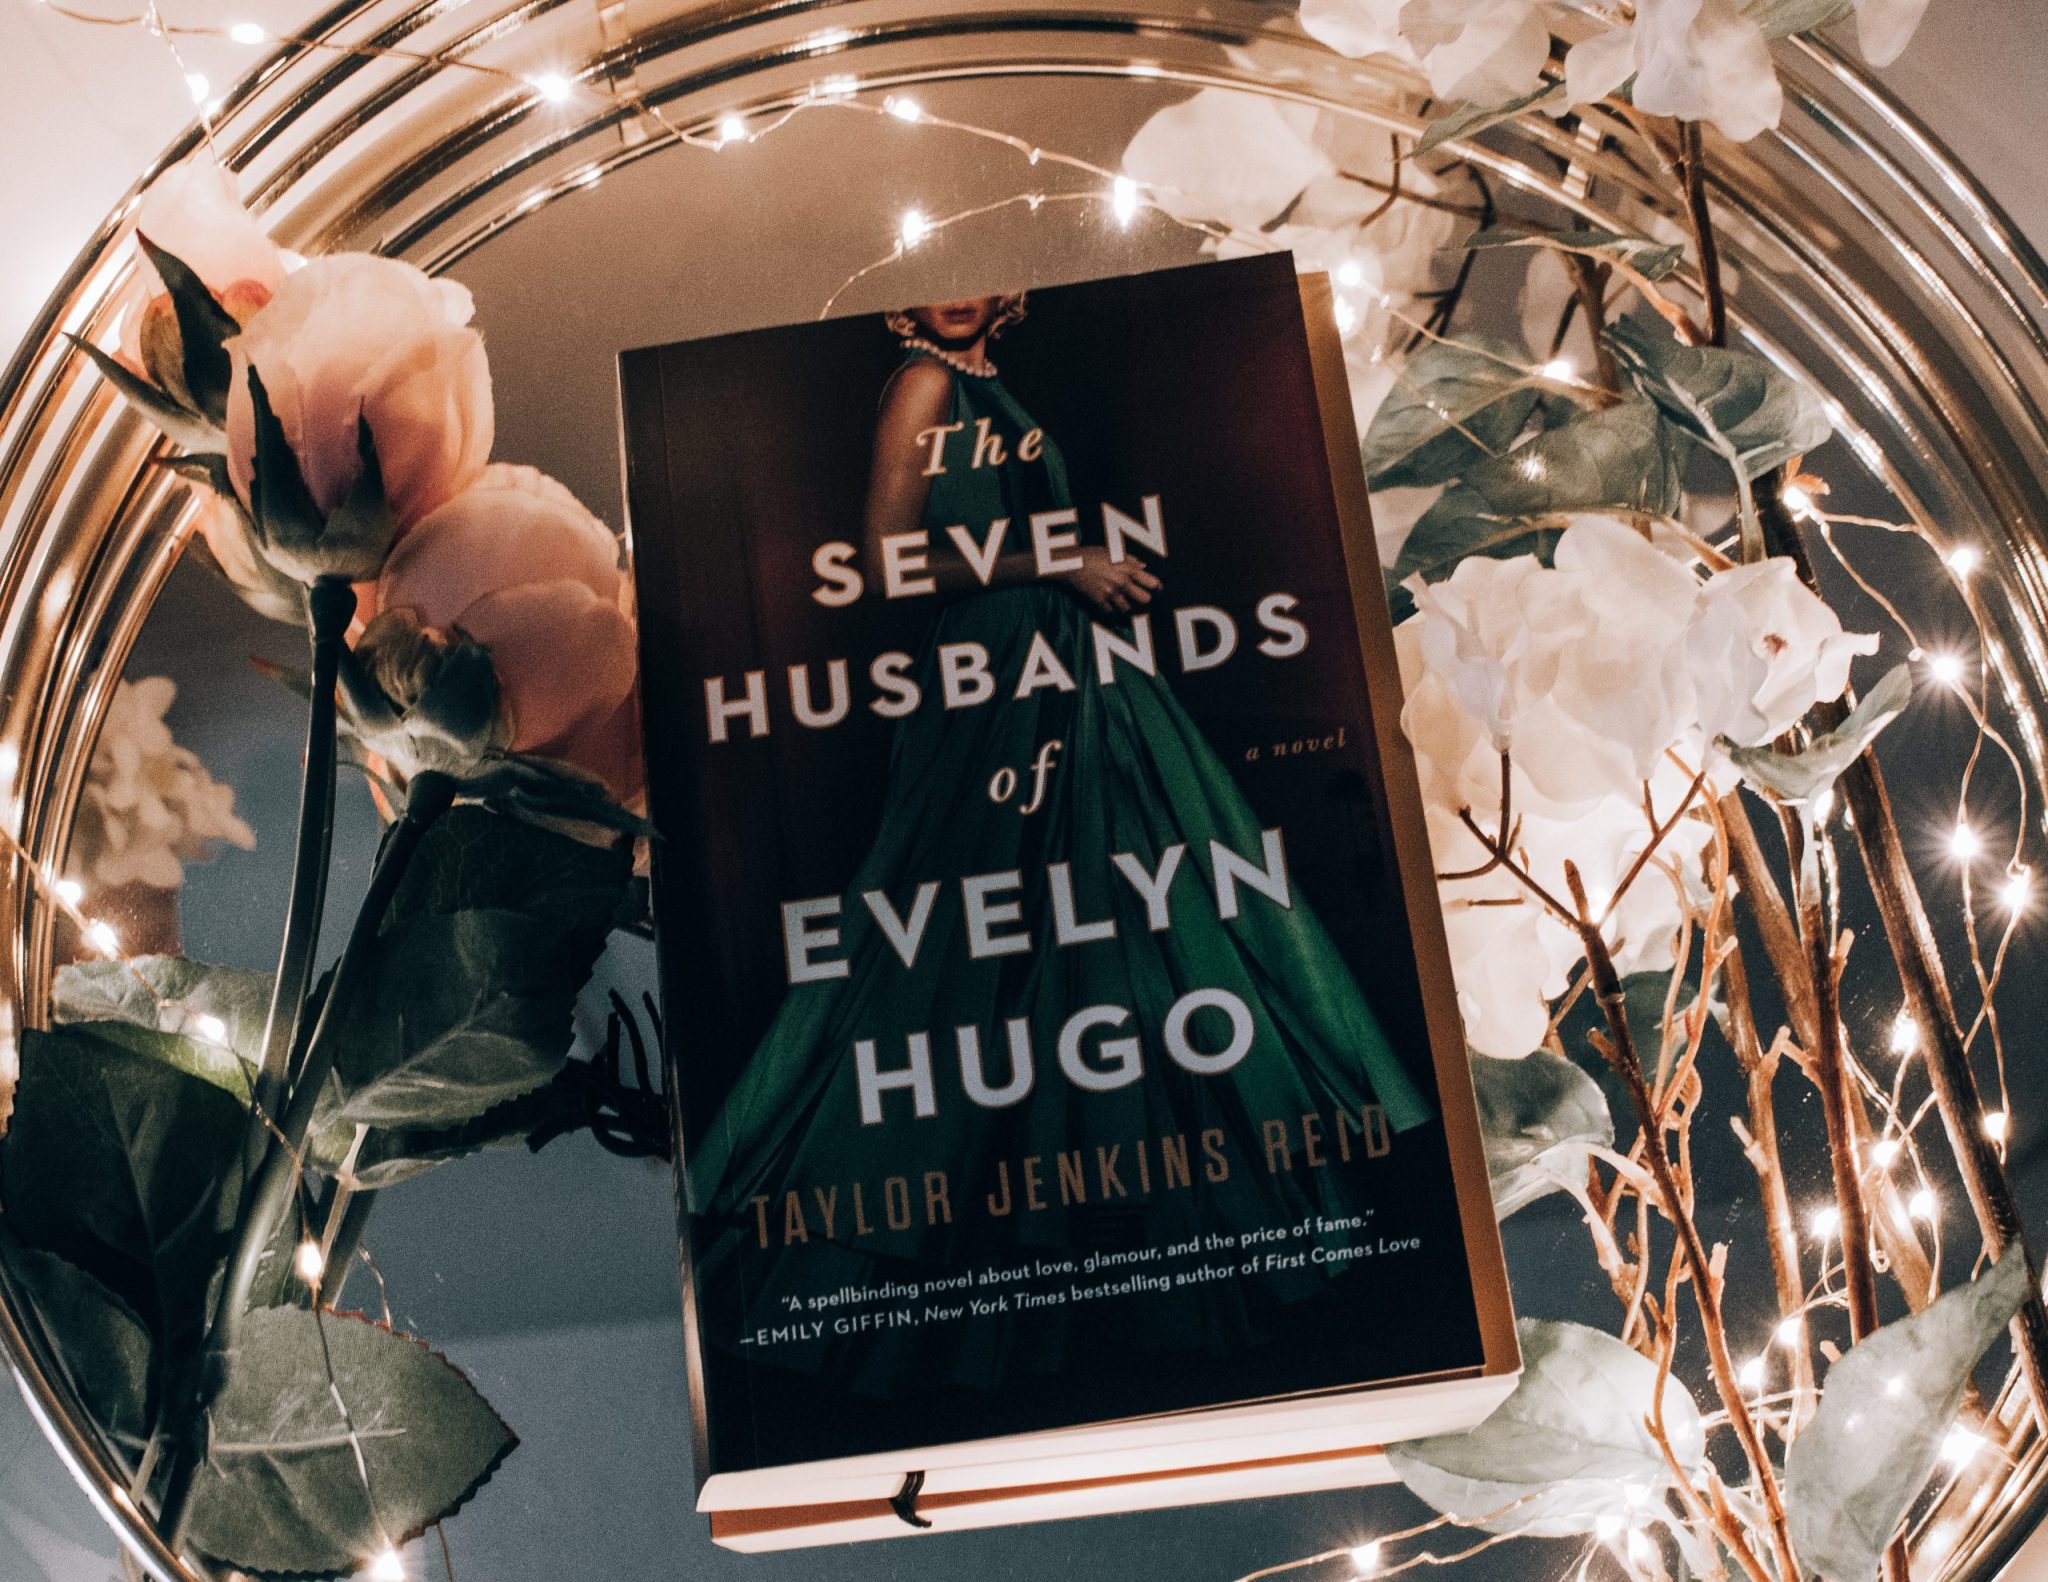 The Seven Husbands of Evelyn Hugo' Movie: Everything We Know So Far